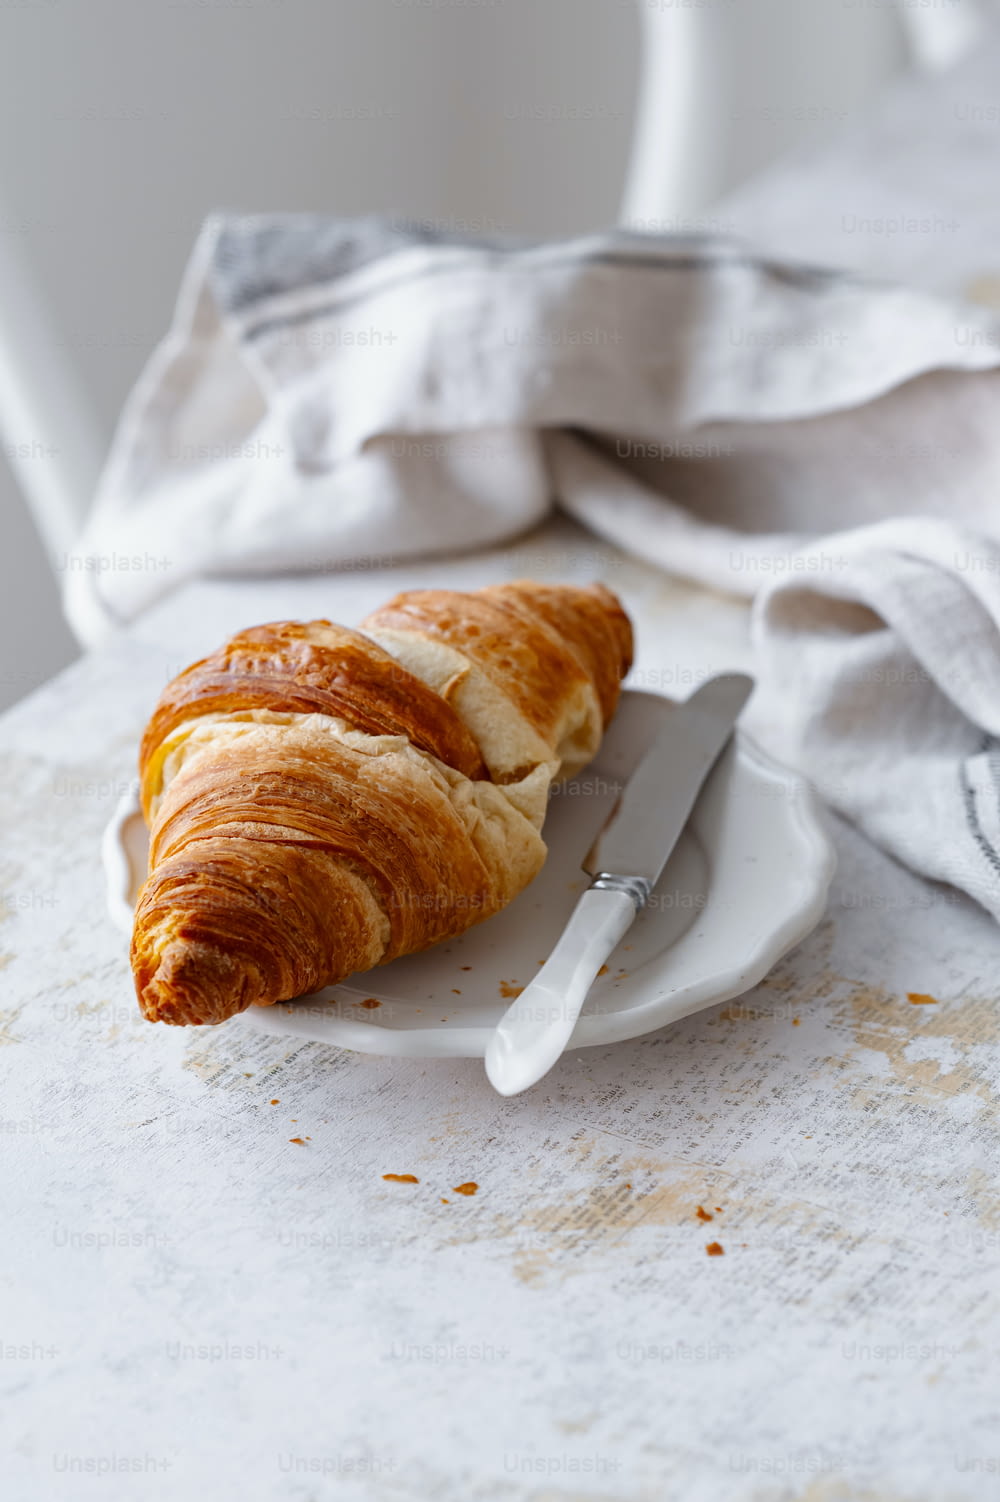 a croissant sitting on a plate next to a knife and fork